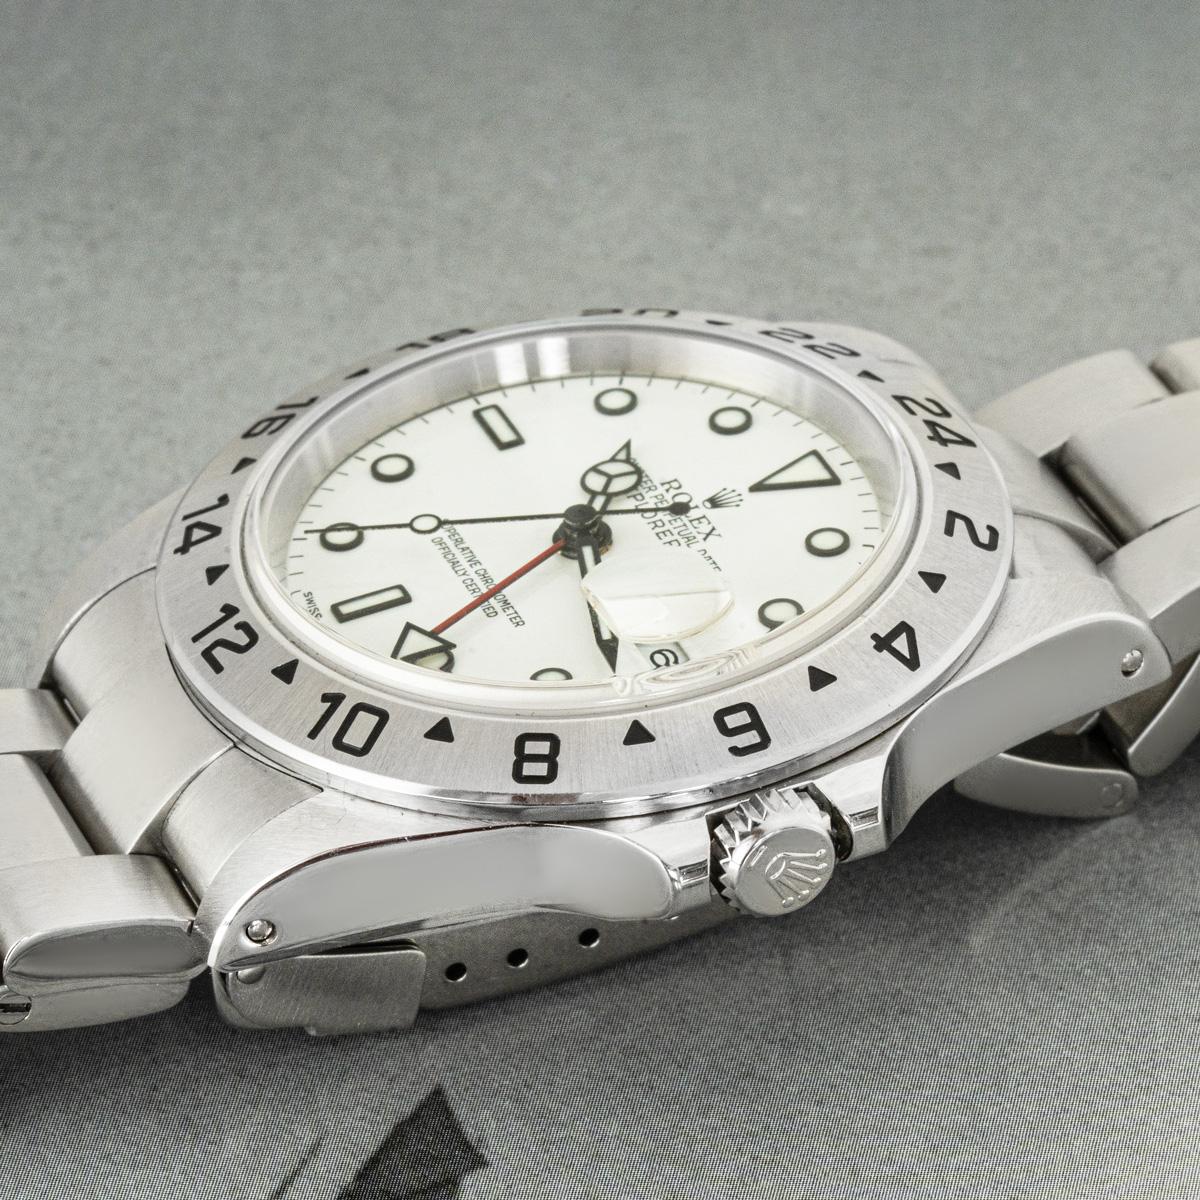 A 40mm Explorer II by Rolex in stainless steel. Features a white dial with the date, a red 24-hour hand and a fixed bezel featuring a 24-hour display. Fitted with sapphire crystal, a self-winding automatic movement and an Oyster bracelet brought